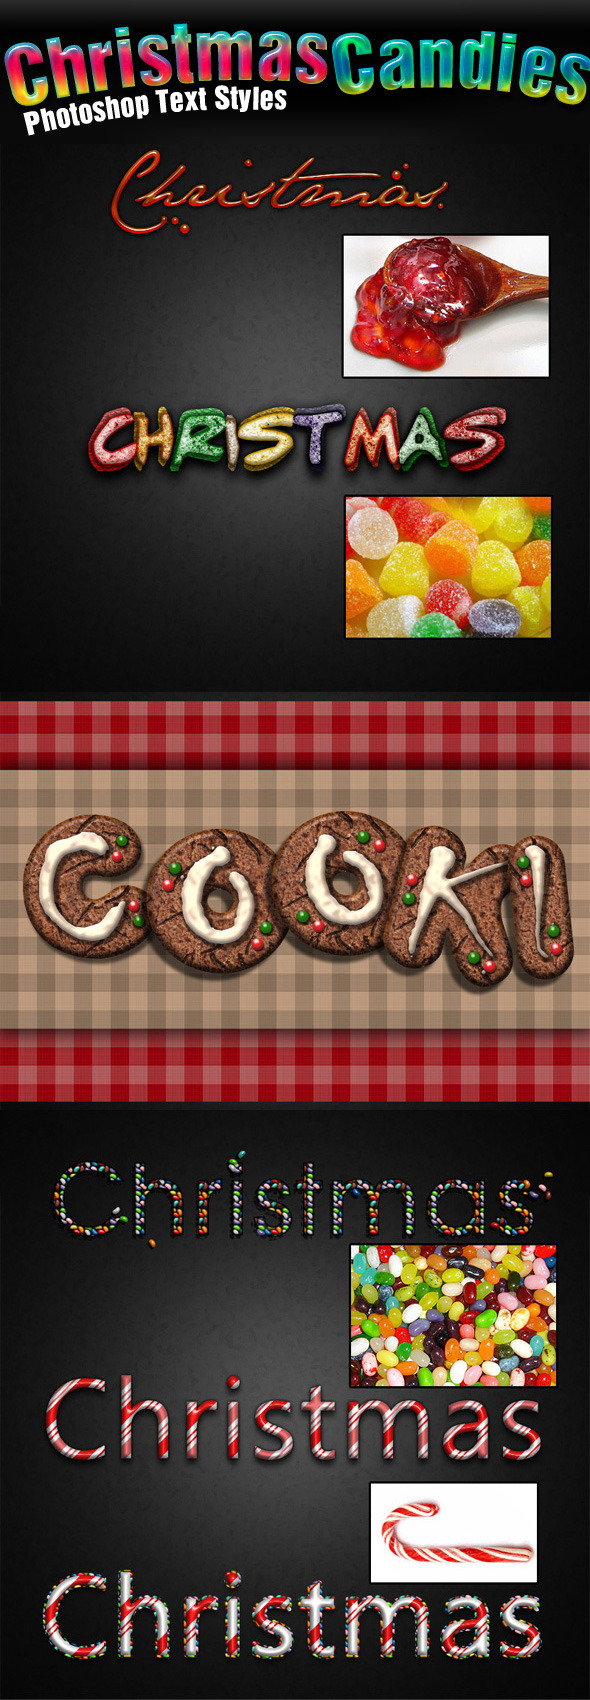 6 Christmas Candy Photoshop Text Styles